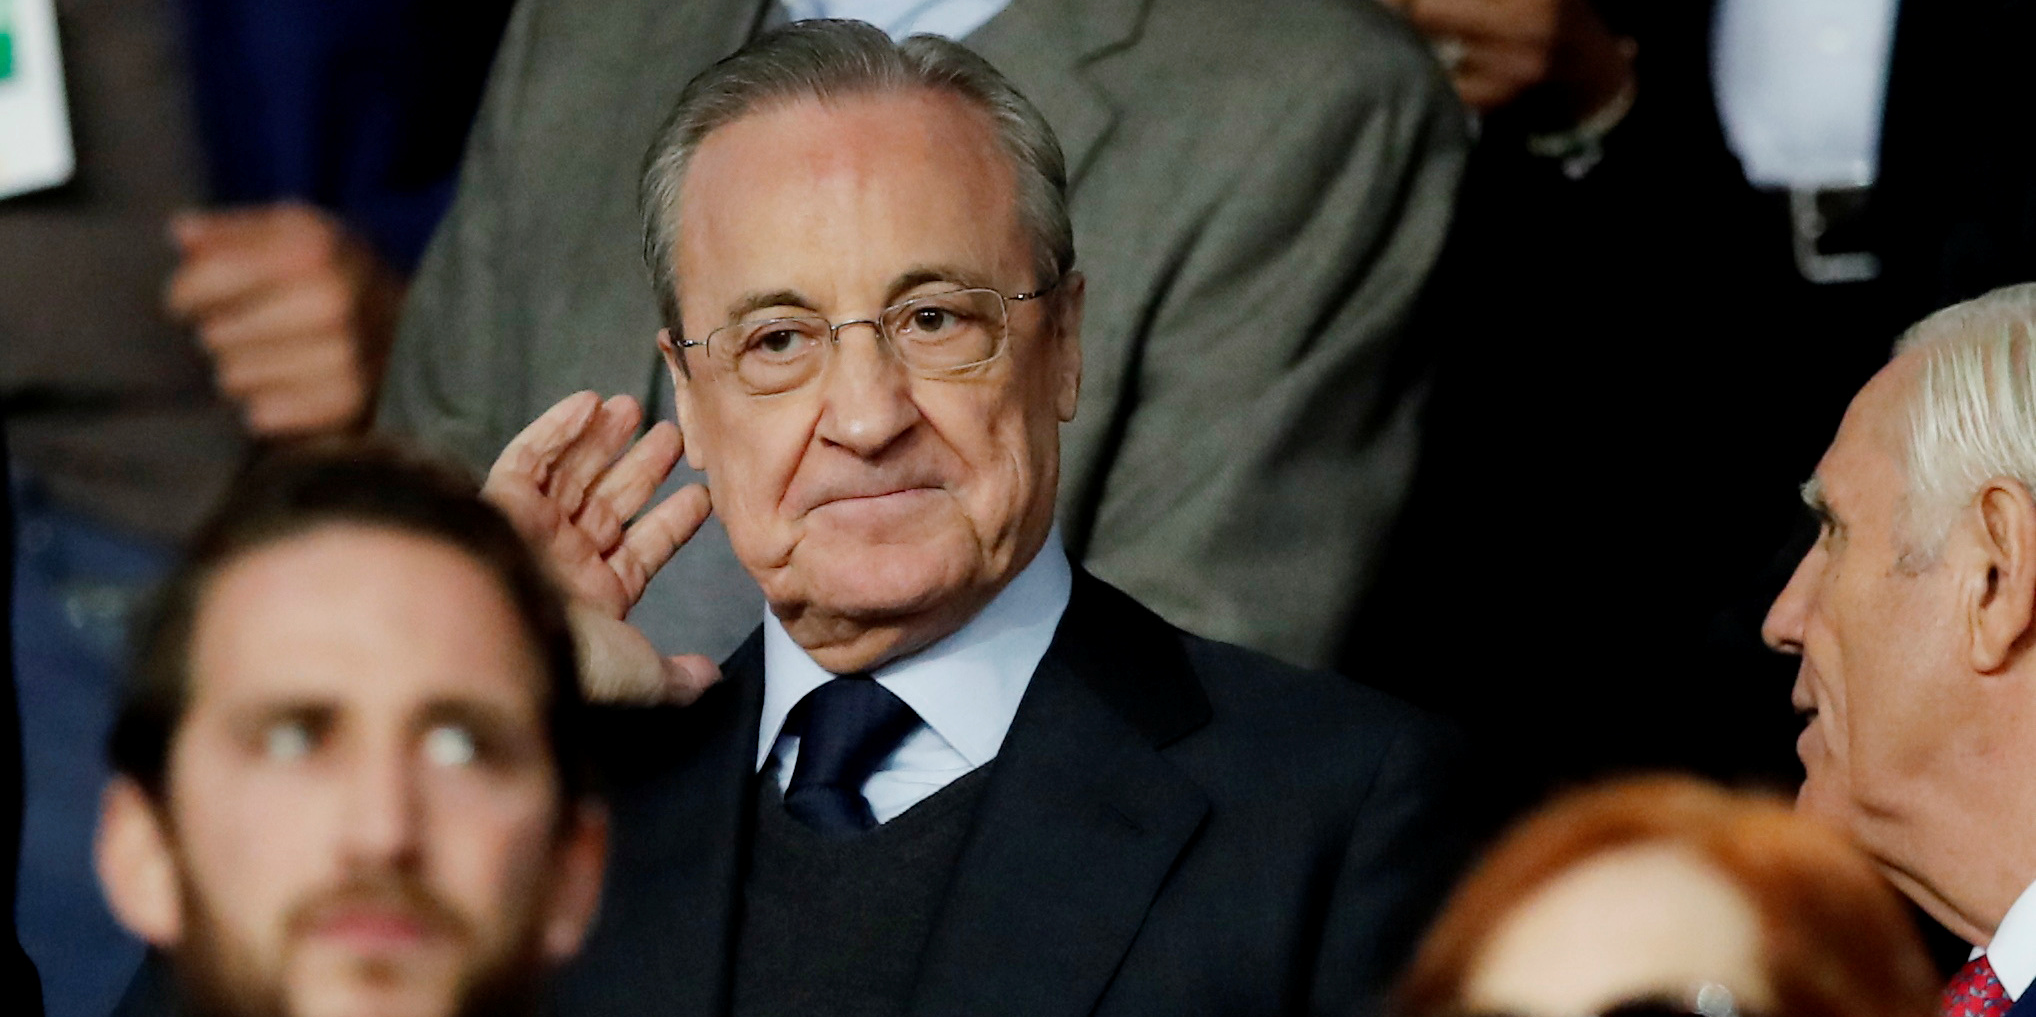 https://img5.s3wfg.com/web/img/images_uploaded/4/b/florentino-perez-real-madrid-football-league.png